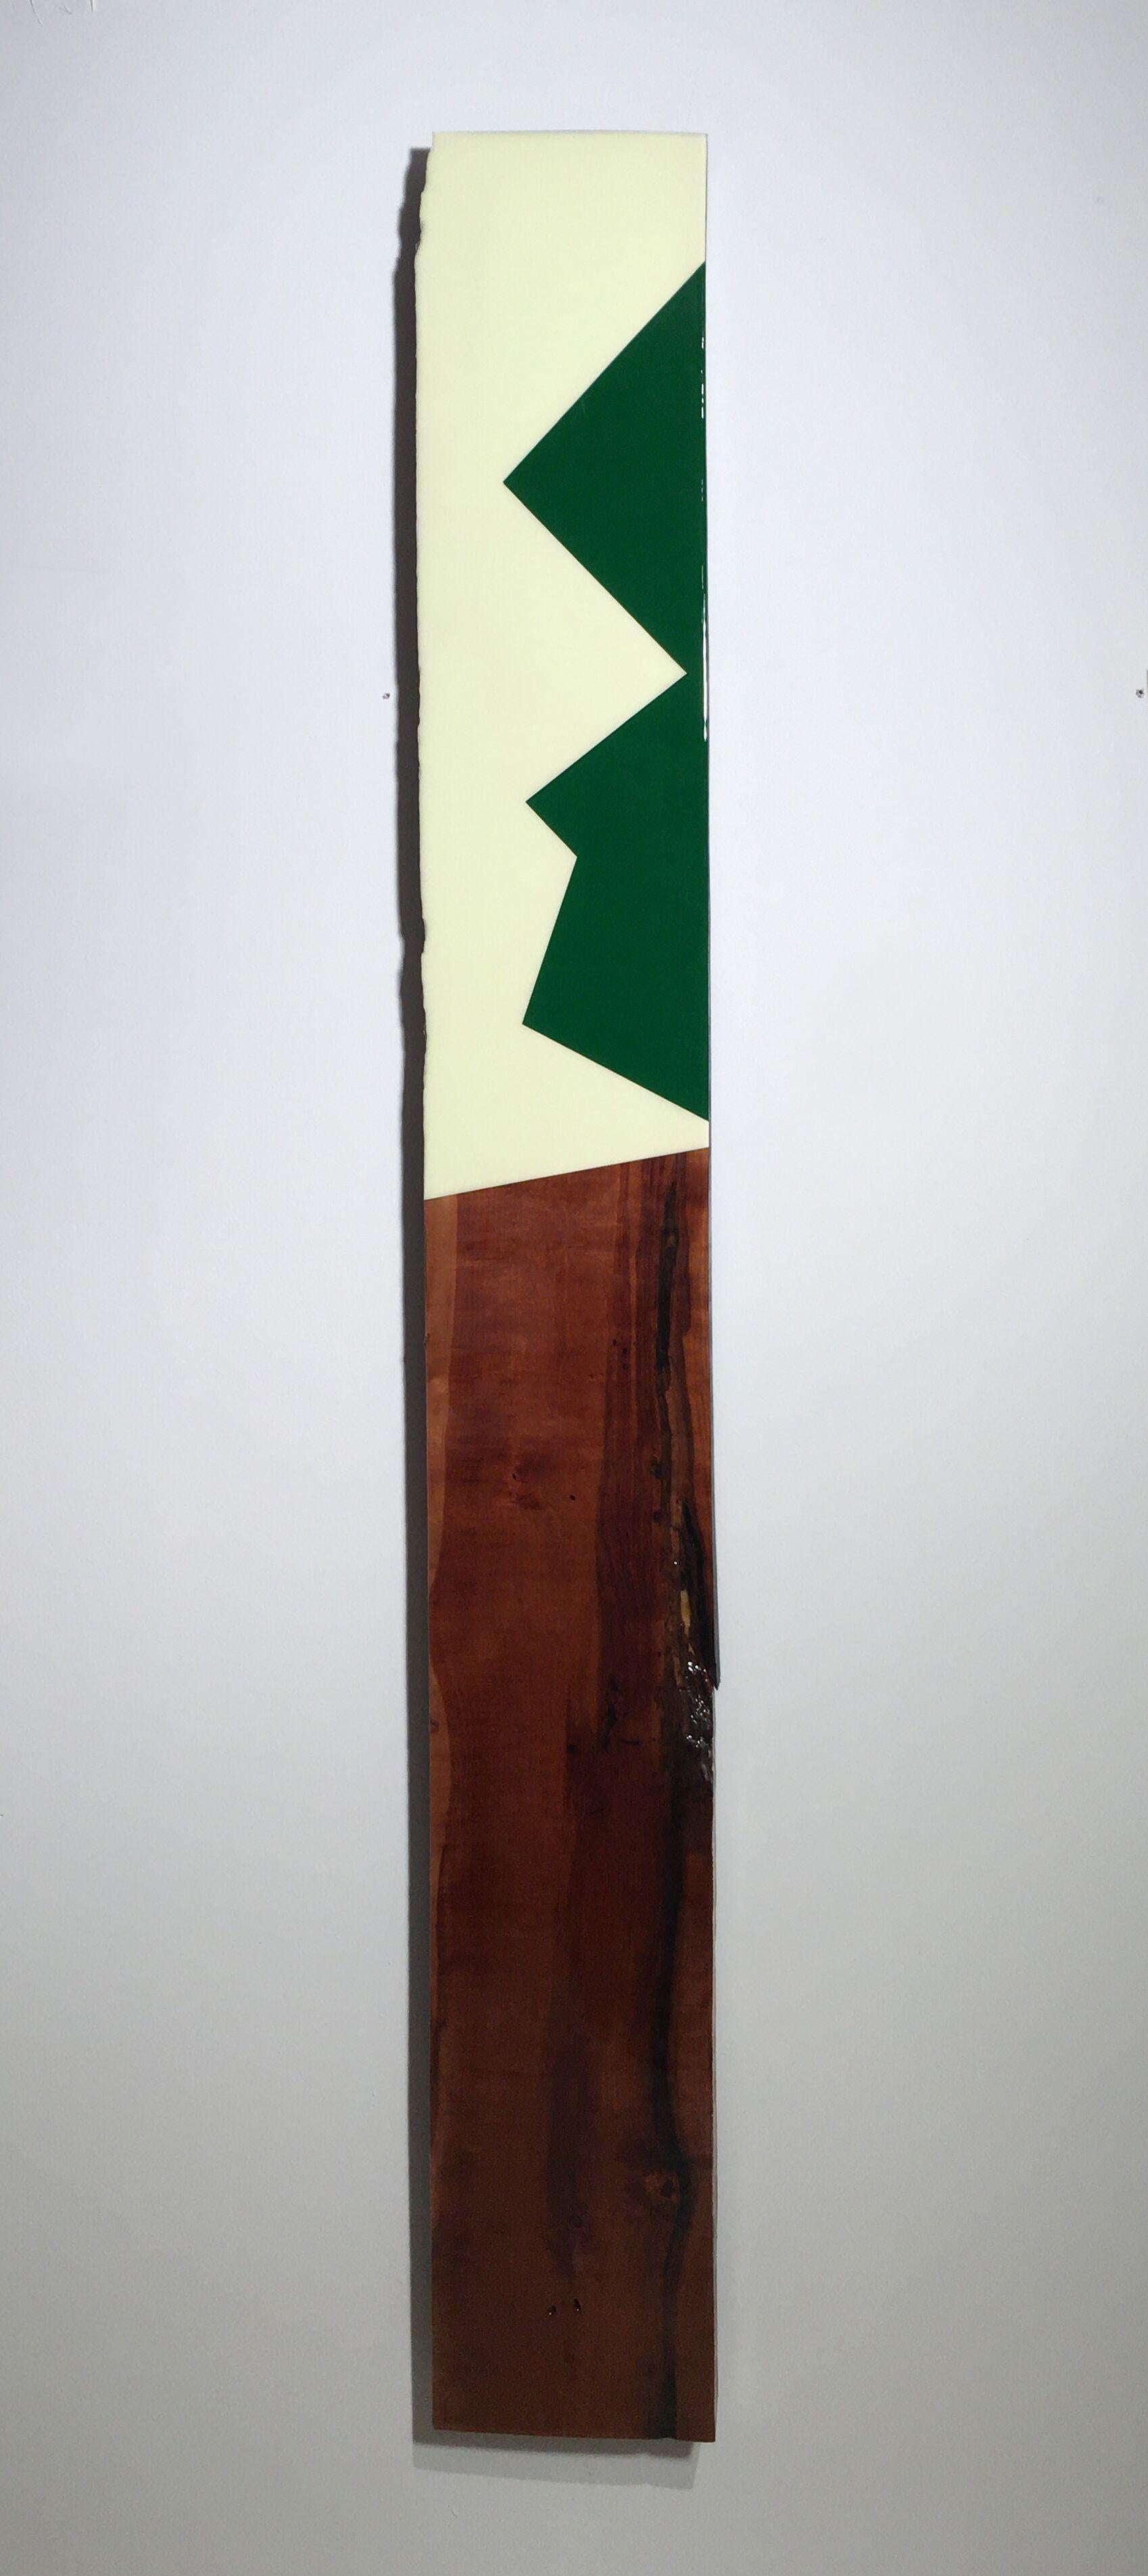 David E. Peterson Abstract Sculpture - "Leaner 63"